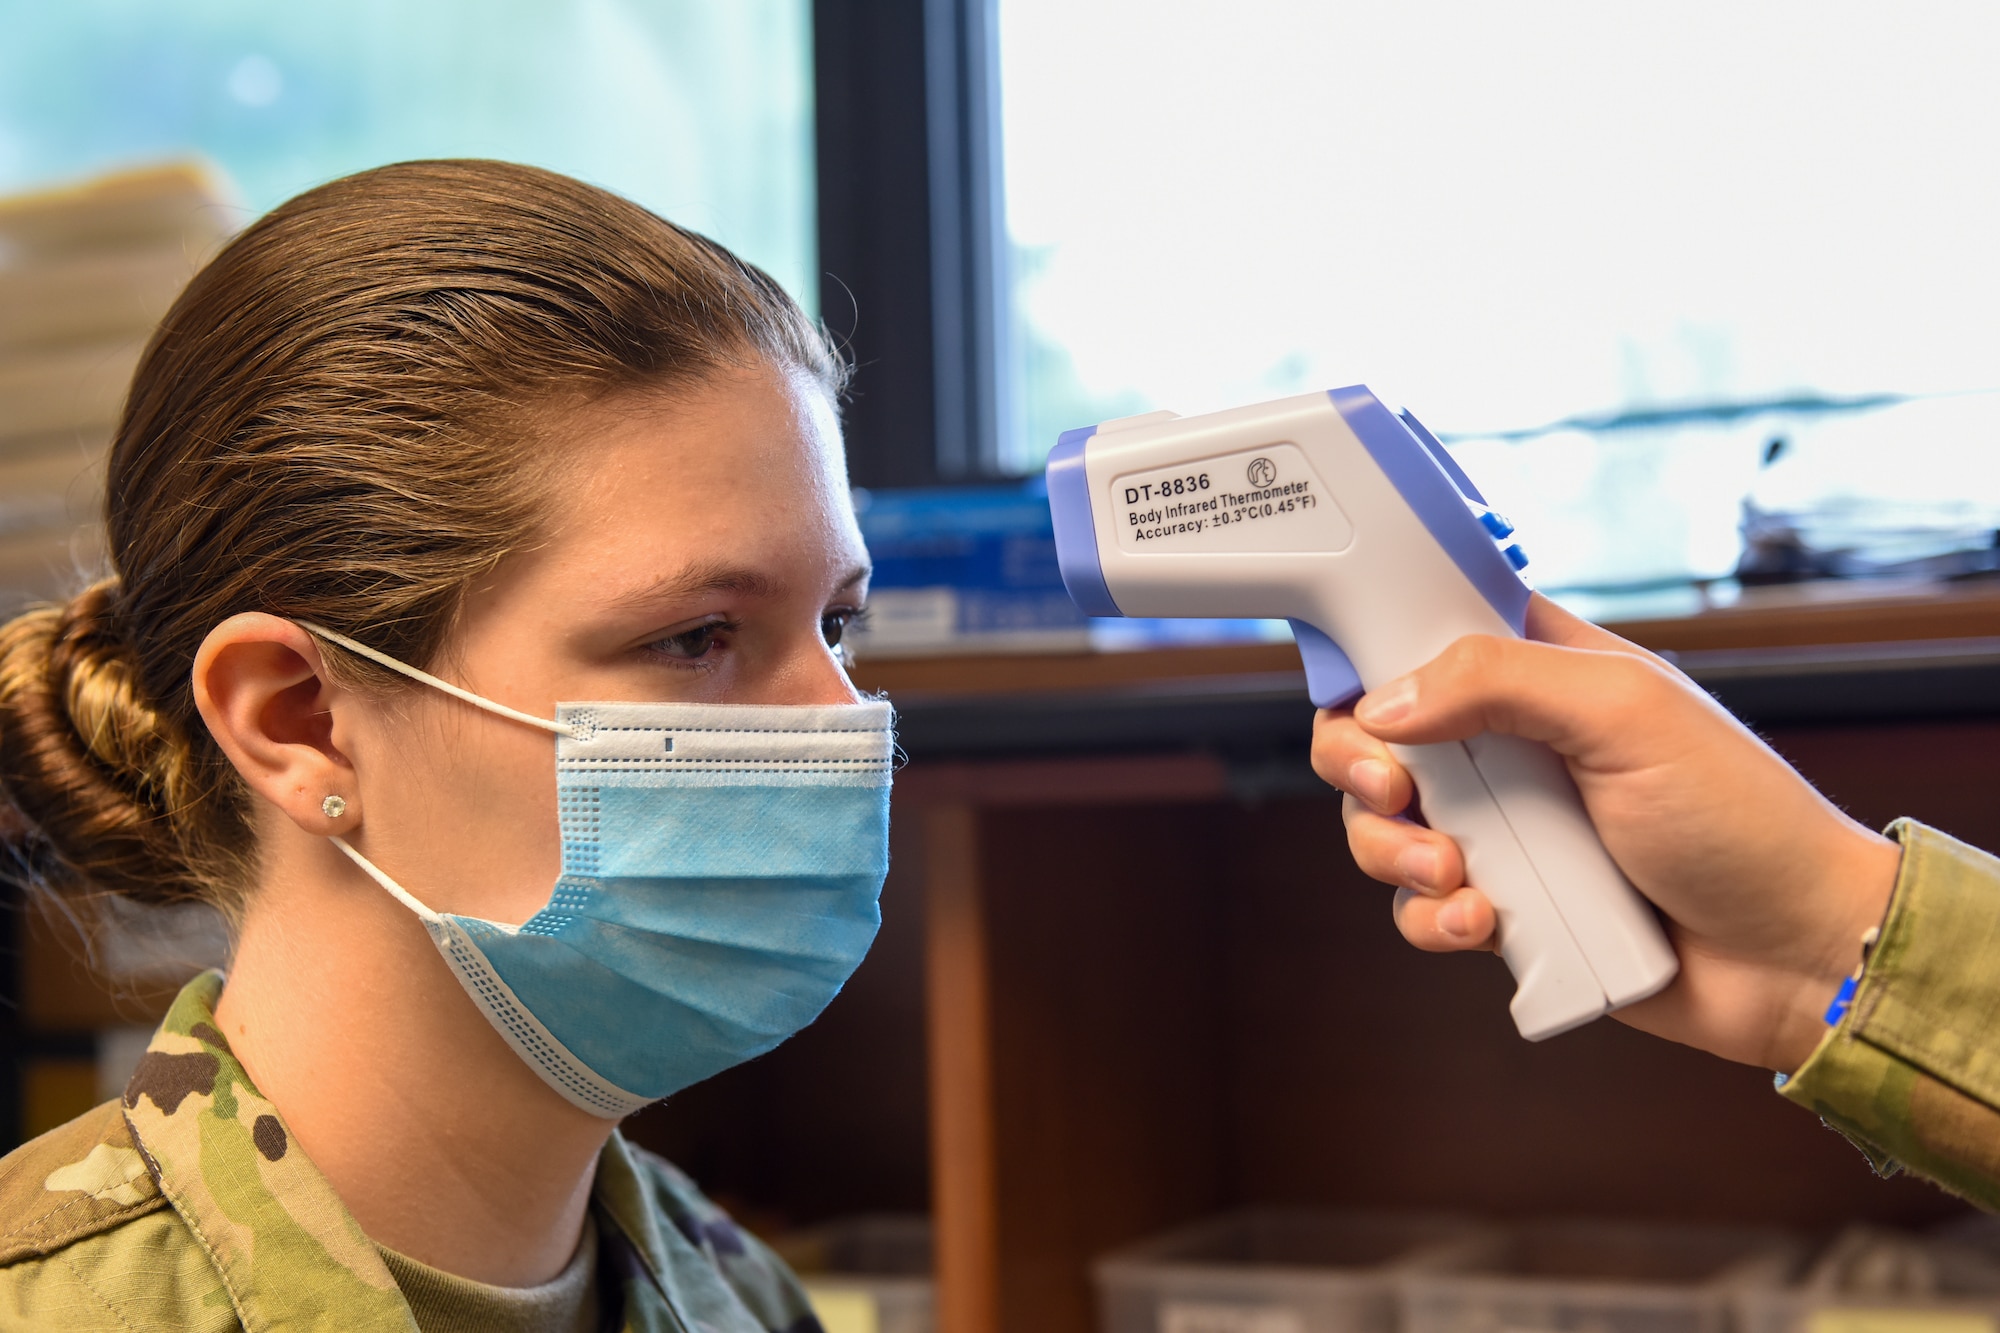 A public health technician takes the temperature of a fellow guardsman at the 171st Air Refueling Wing, Coraopolis, Pennsylvania, June 3, 2020. Masks are to be worn at all times except when isolated from others in private spaces. (U.S. Air National Guard photo by Senior Airman Zoe M. Wockenfuss)